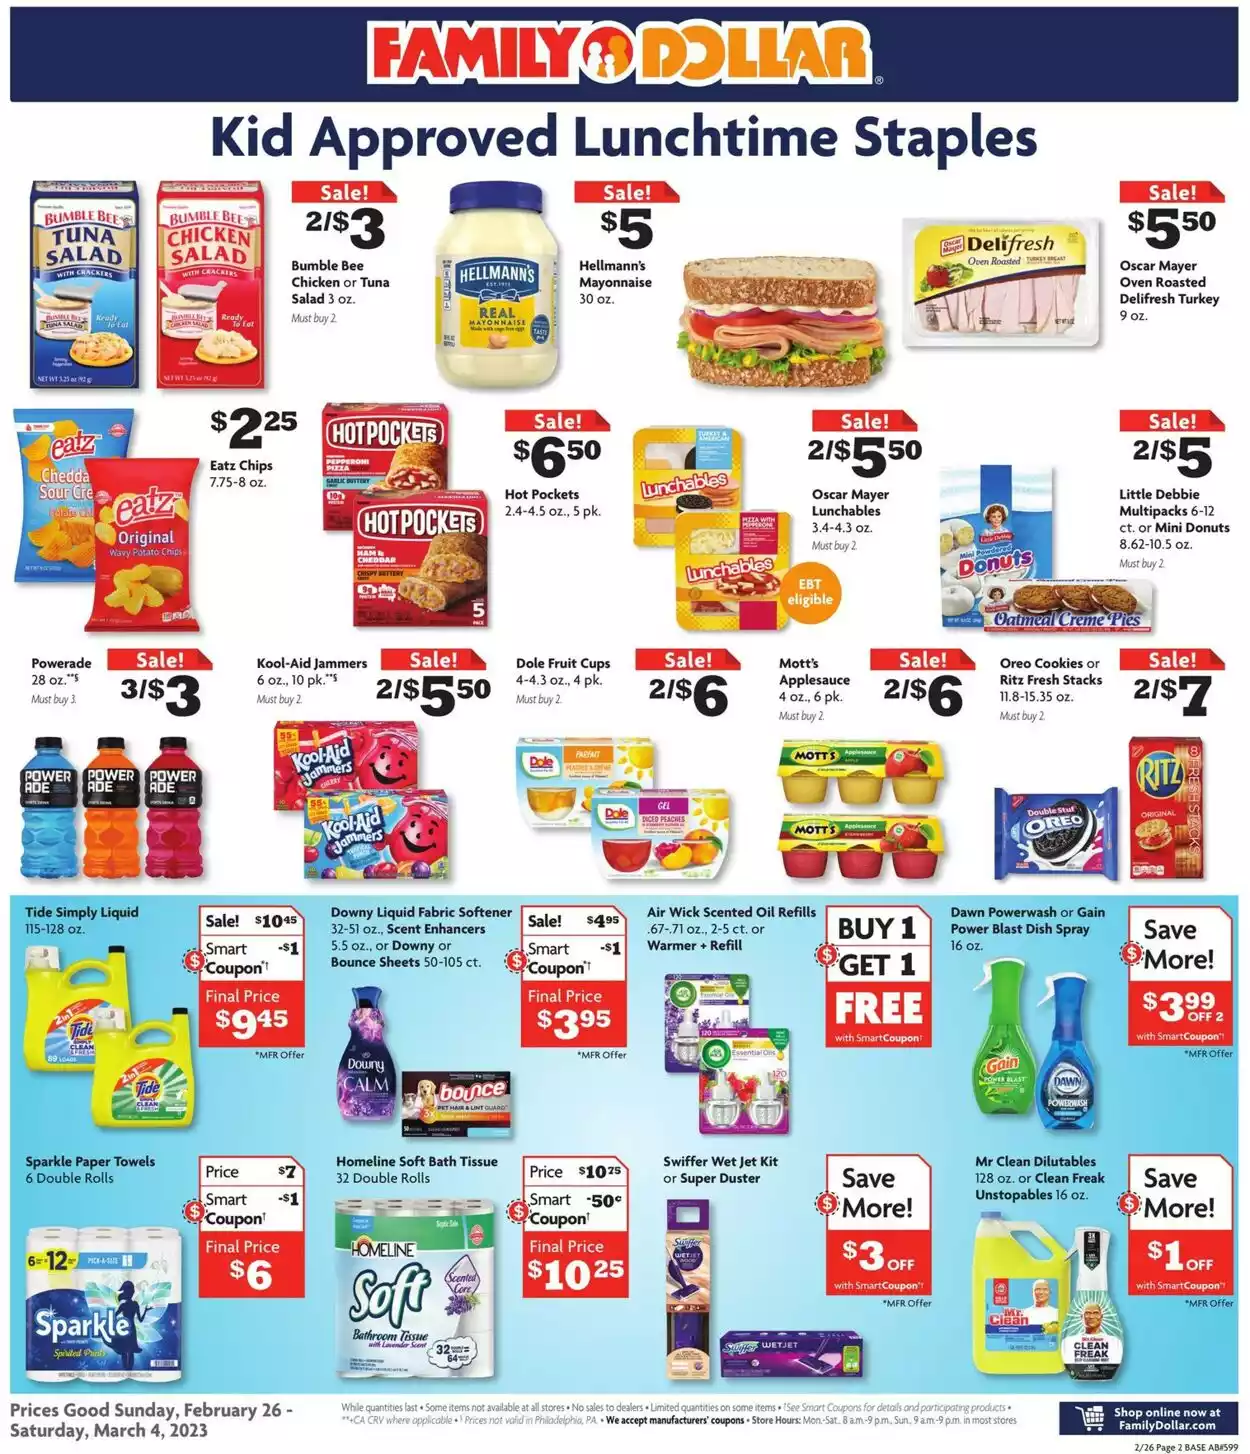 Family Dollar Weekly Ad March 26 - April 1, 2023 2